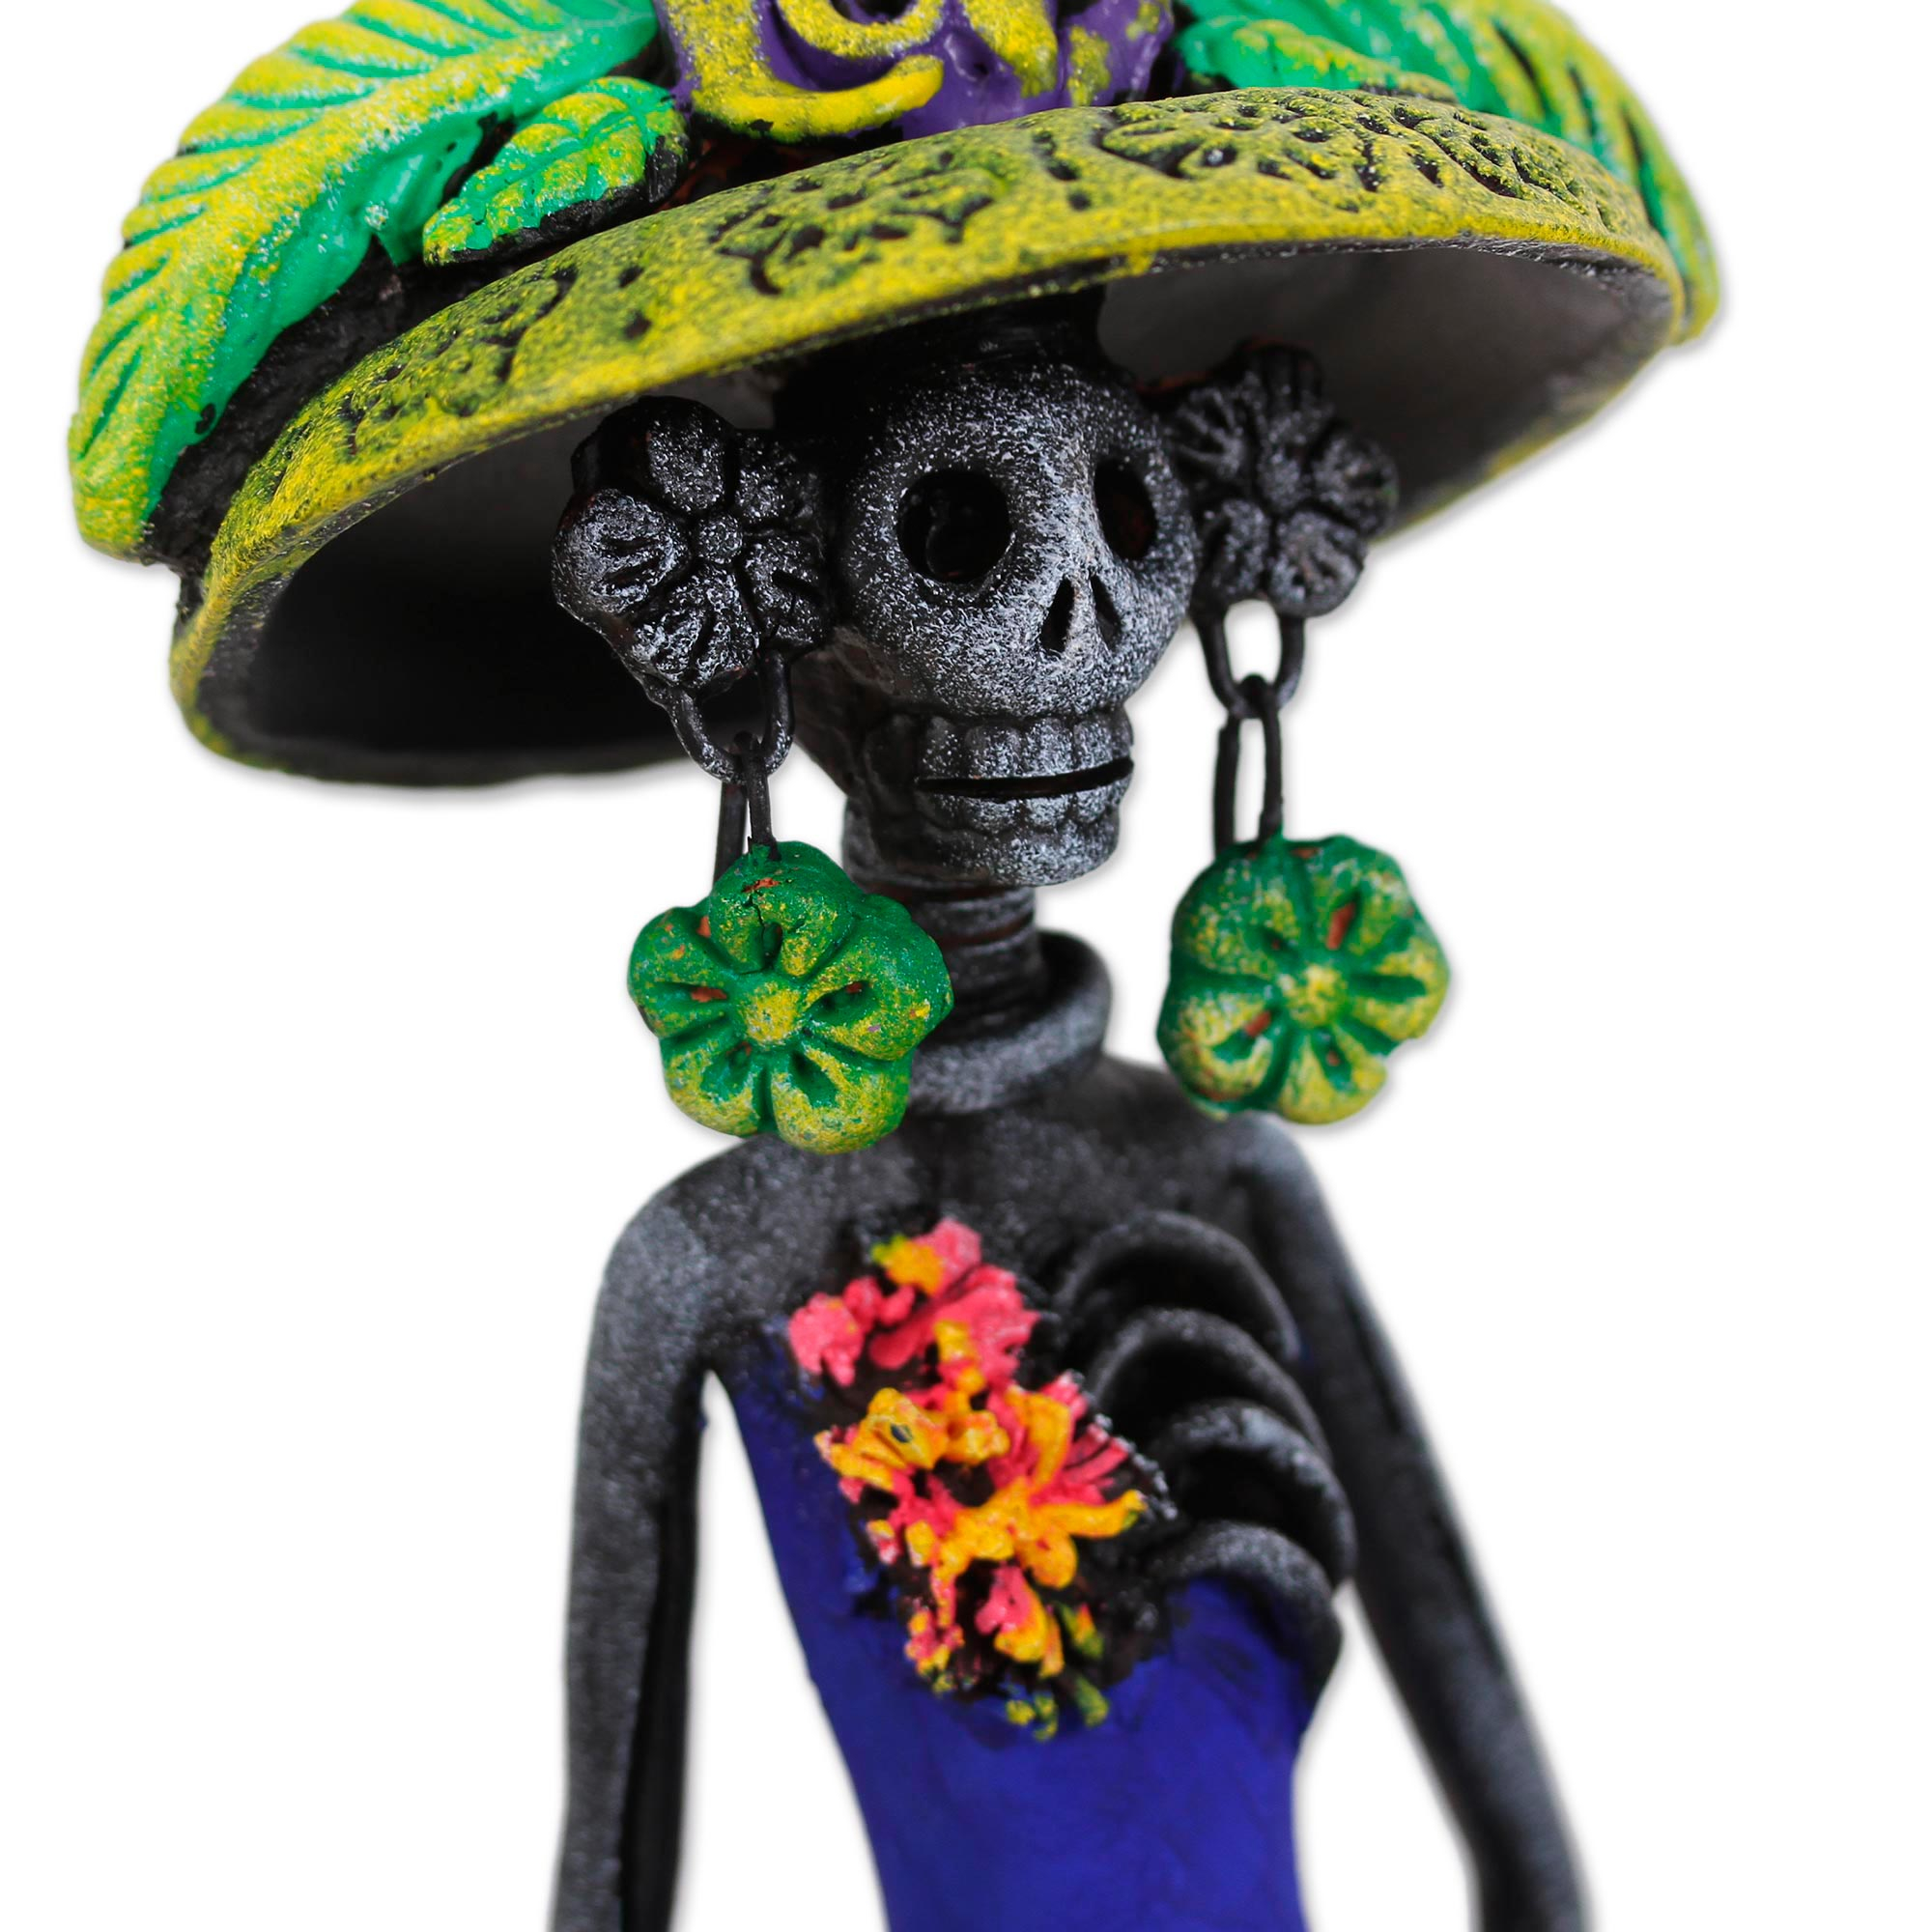 Day Of The Dead Catrina Ceramic Figurine In Blue Dress Catrina With